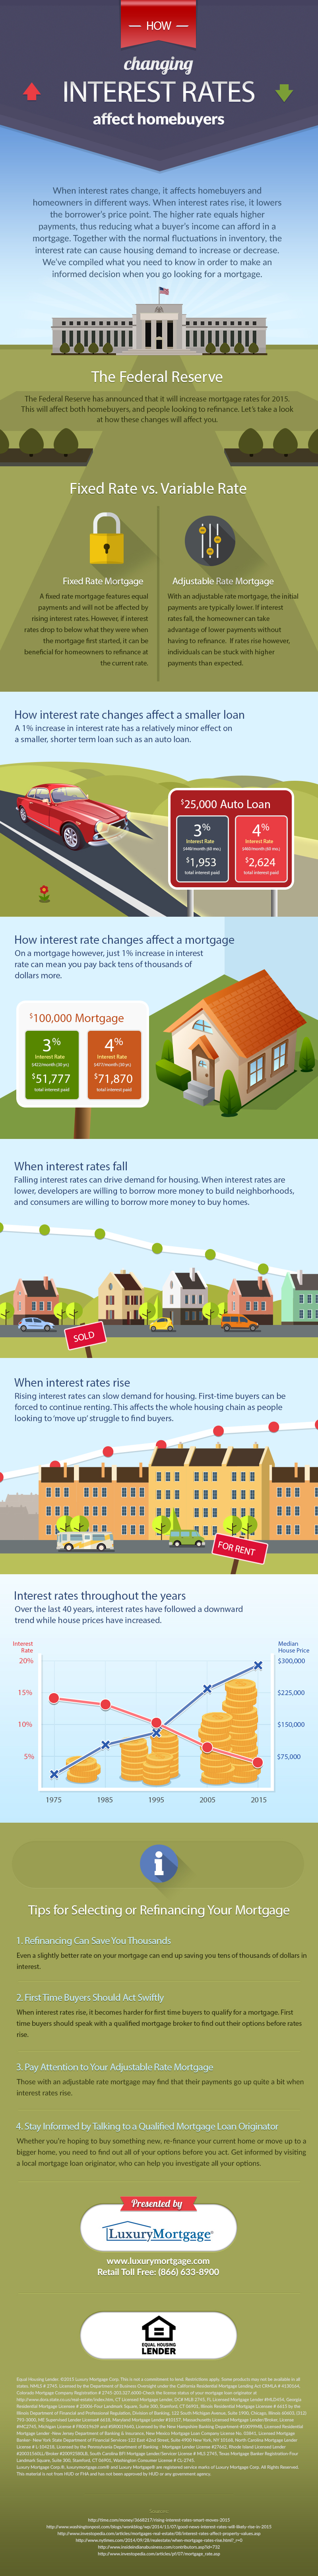 How Changing Interest Rates Affect Homebuyers